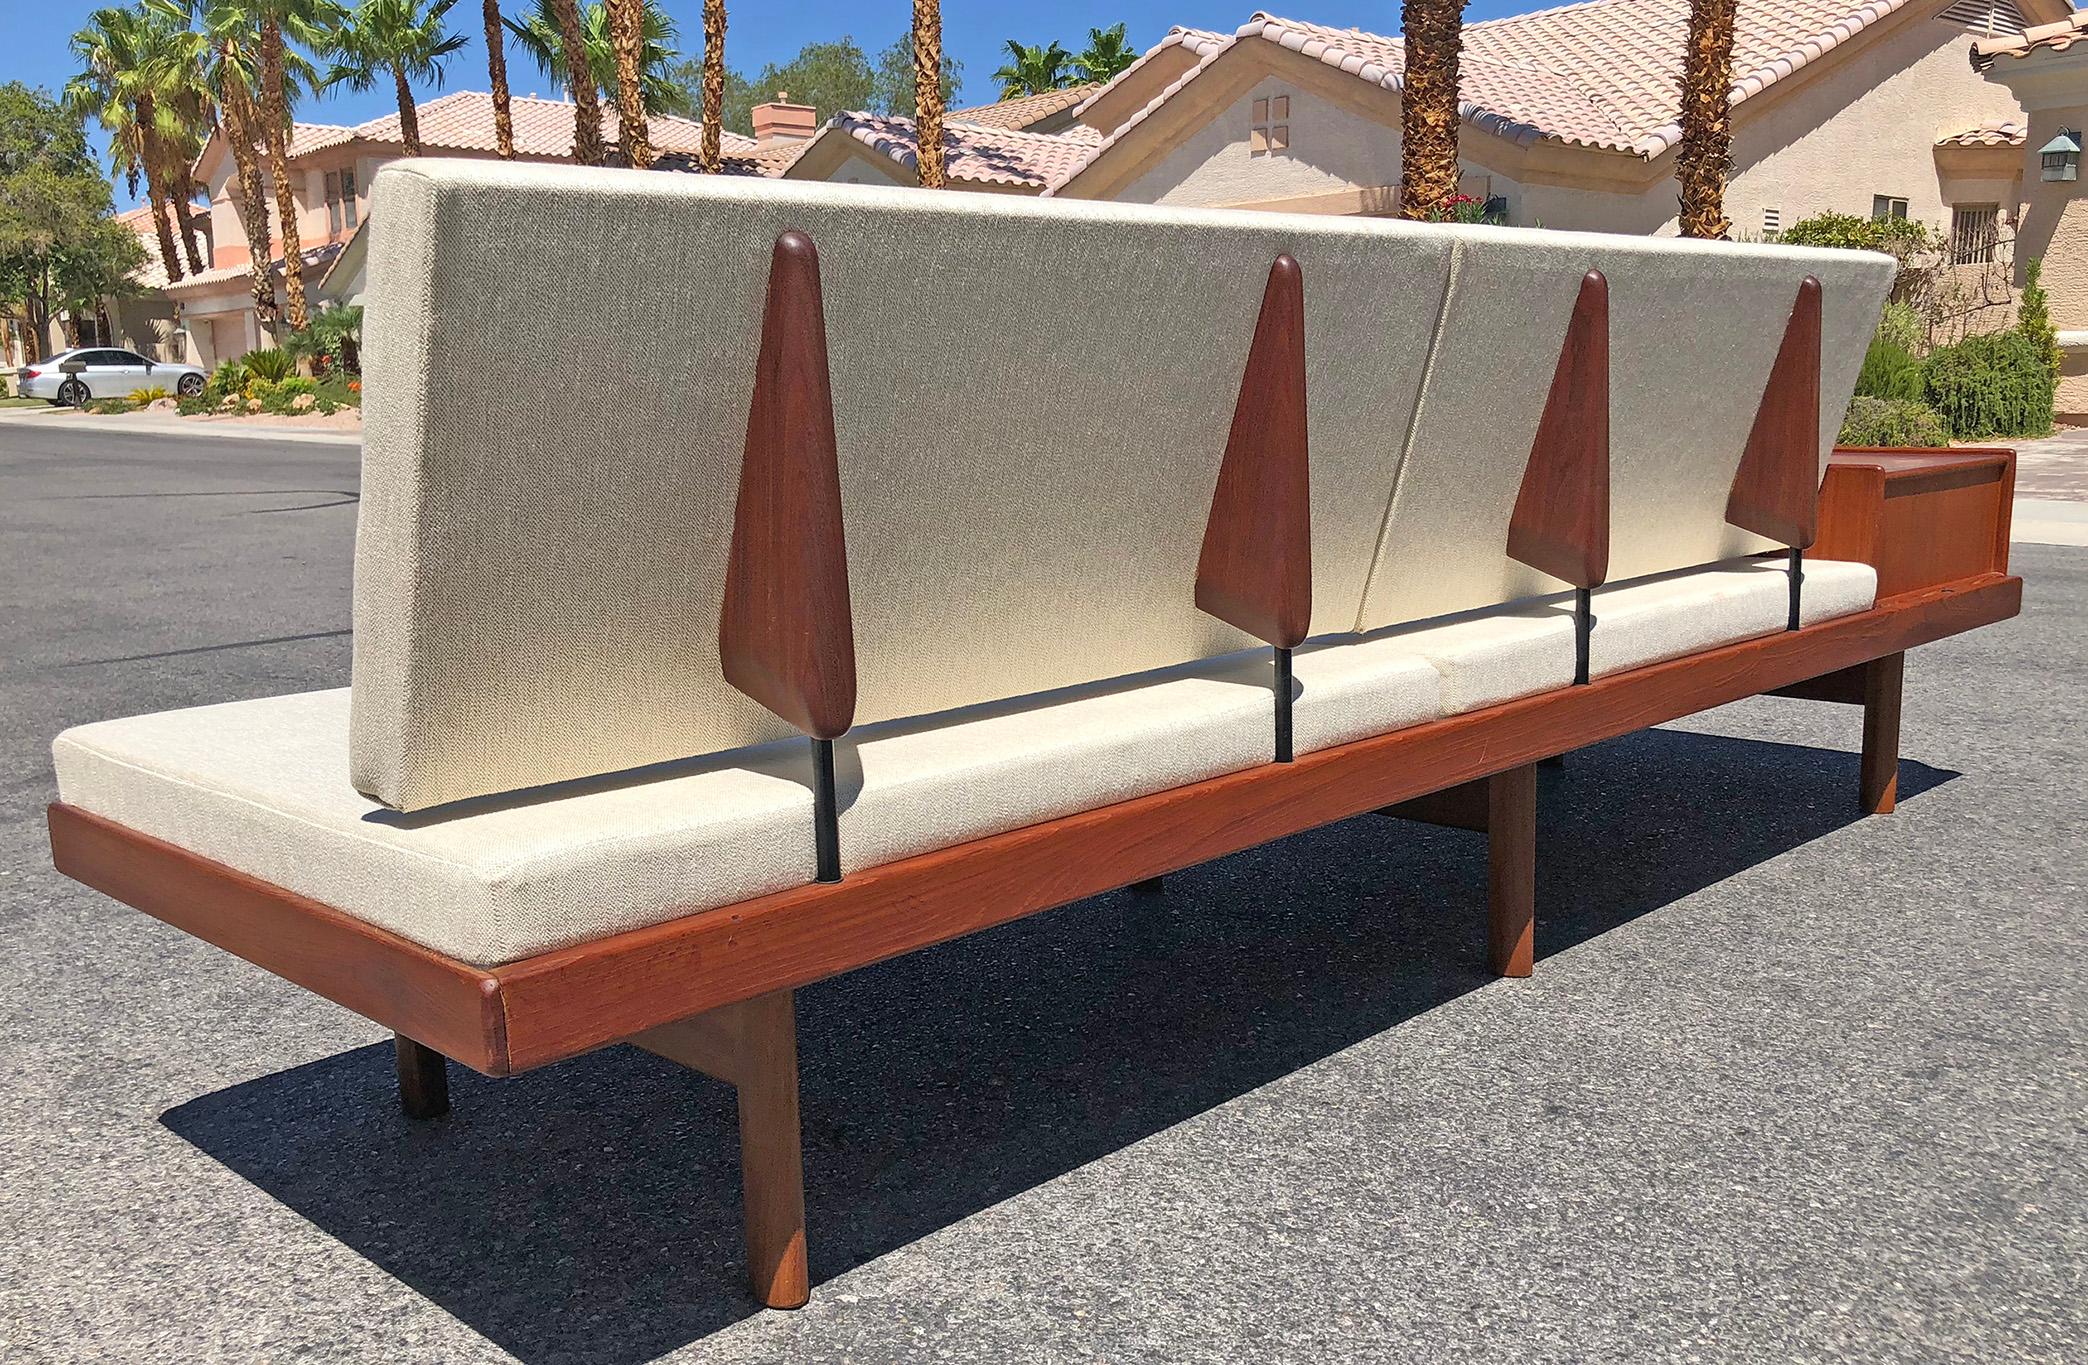 This Mid-Century Modern, Norwegian sofa is just as functional as it is beautiful. The piece features a teak frame with floating and modular features (as photographed). The frame allows for the sofa to be configured in multiple ways by simple pulling